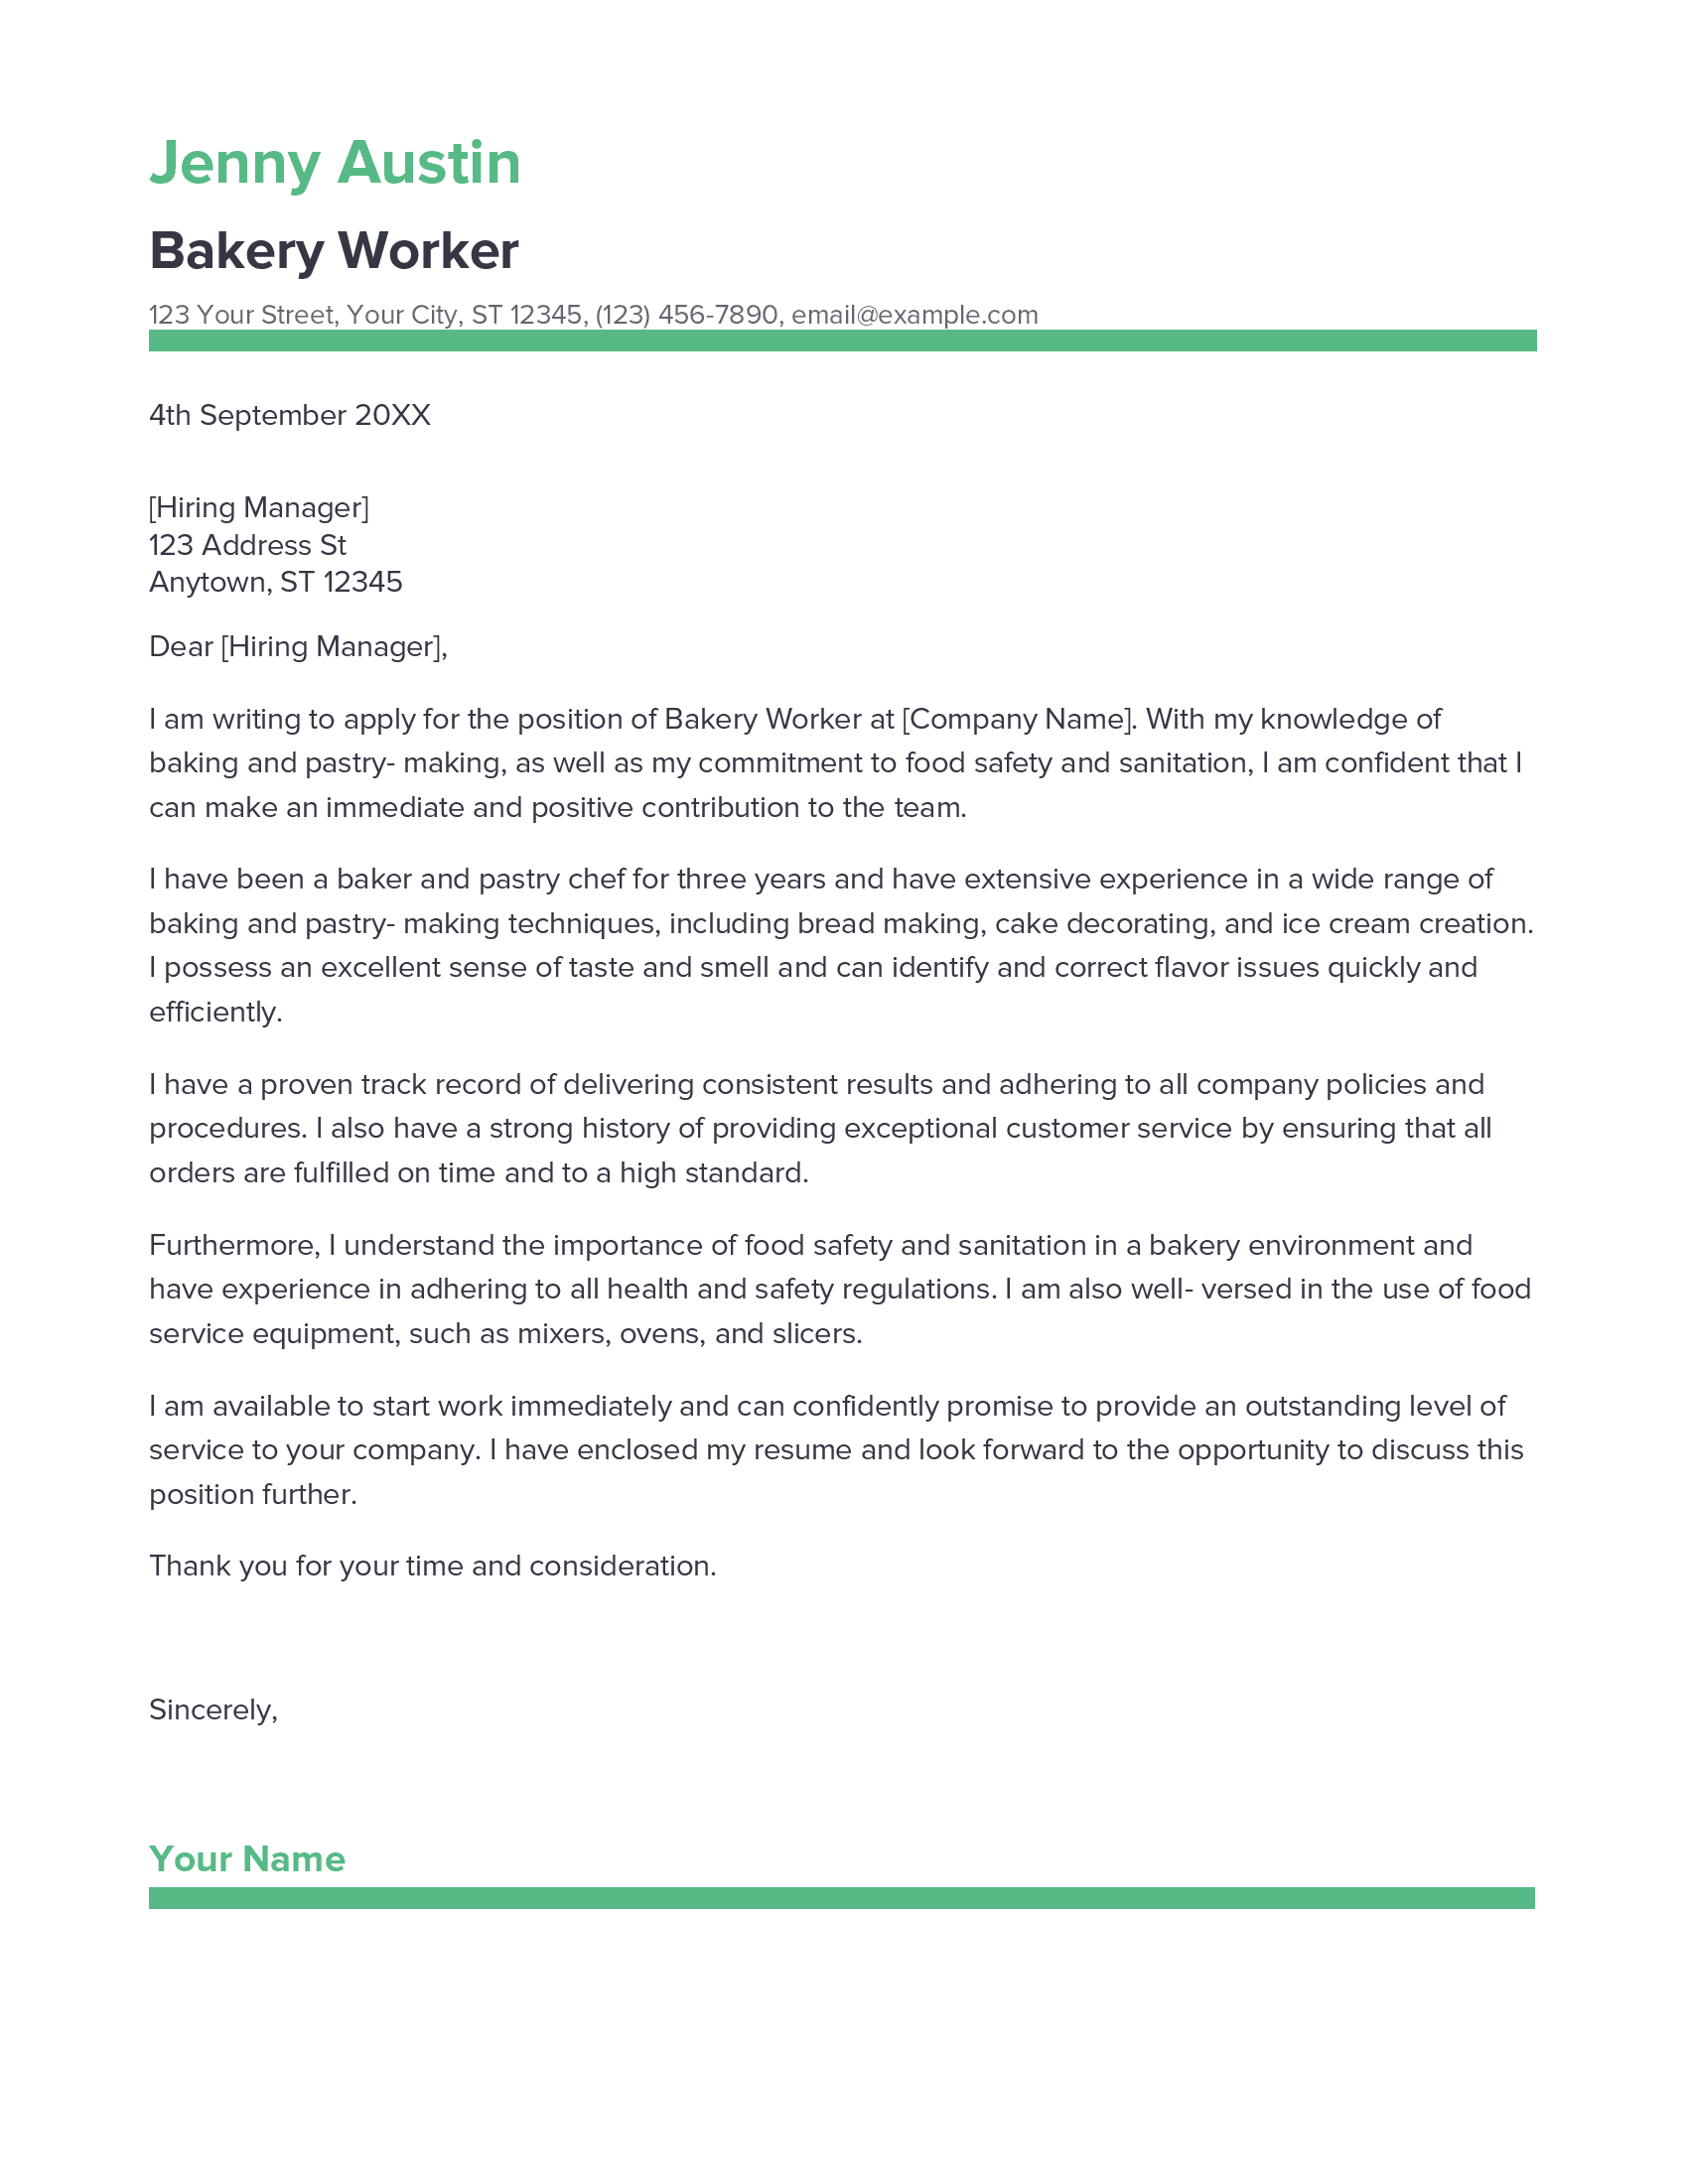 examples of cover letter for bakery